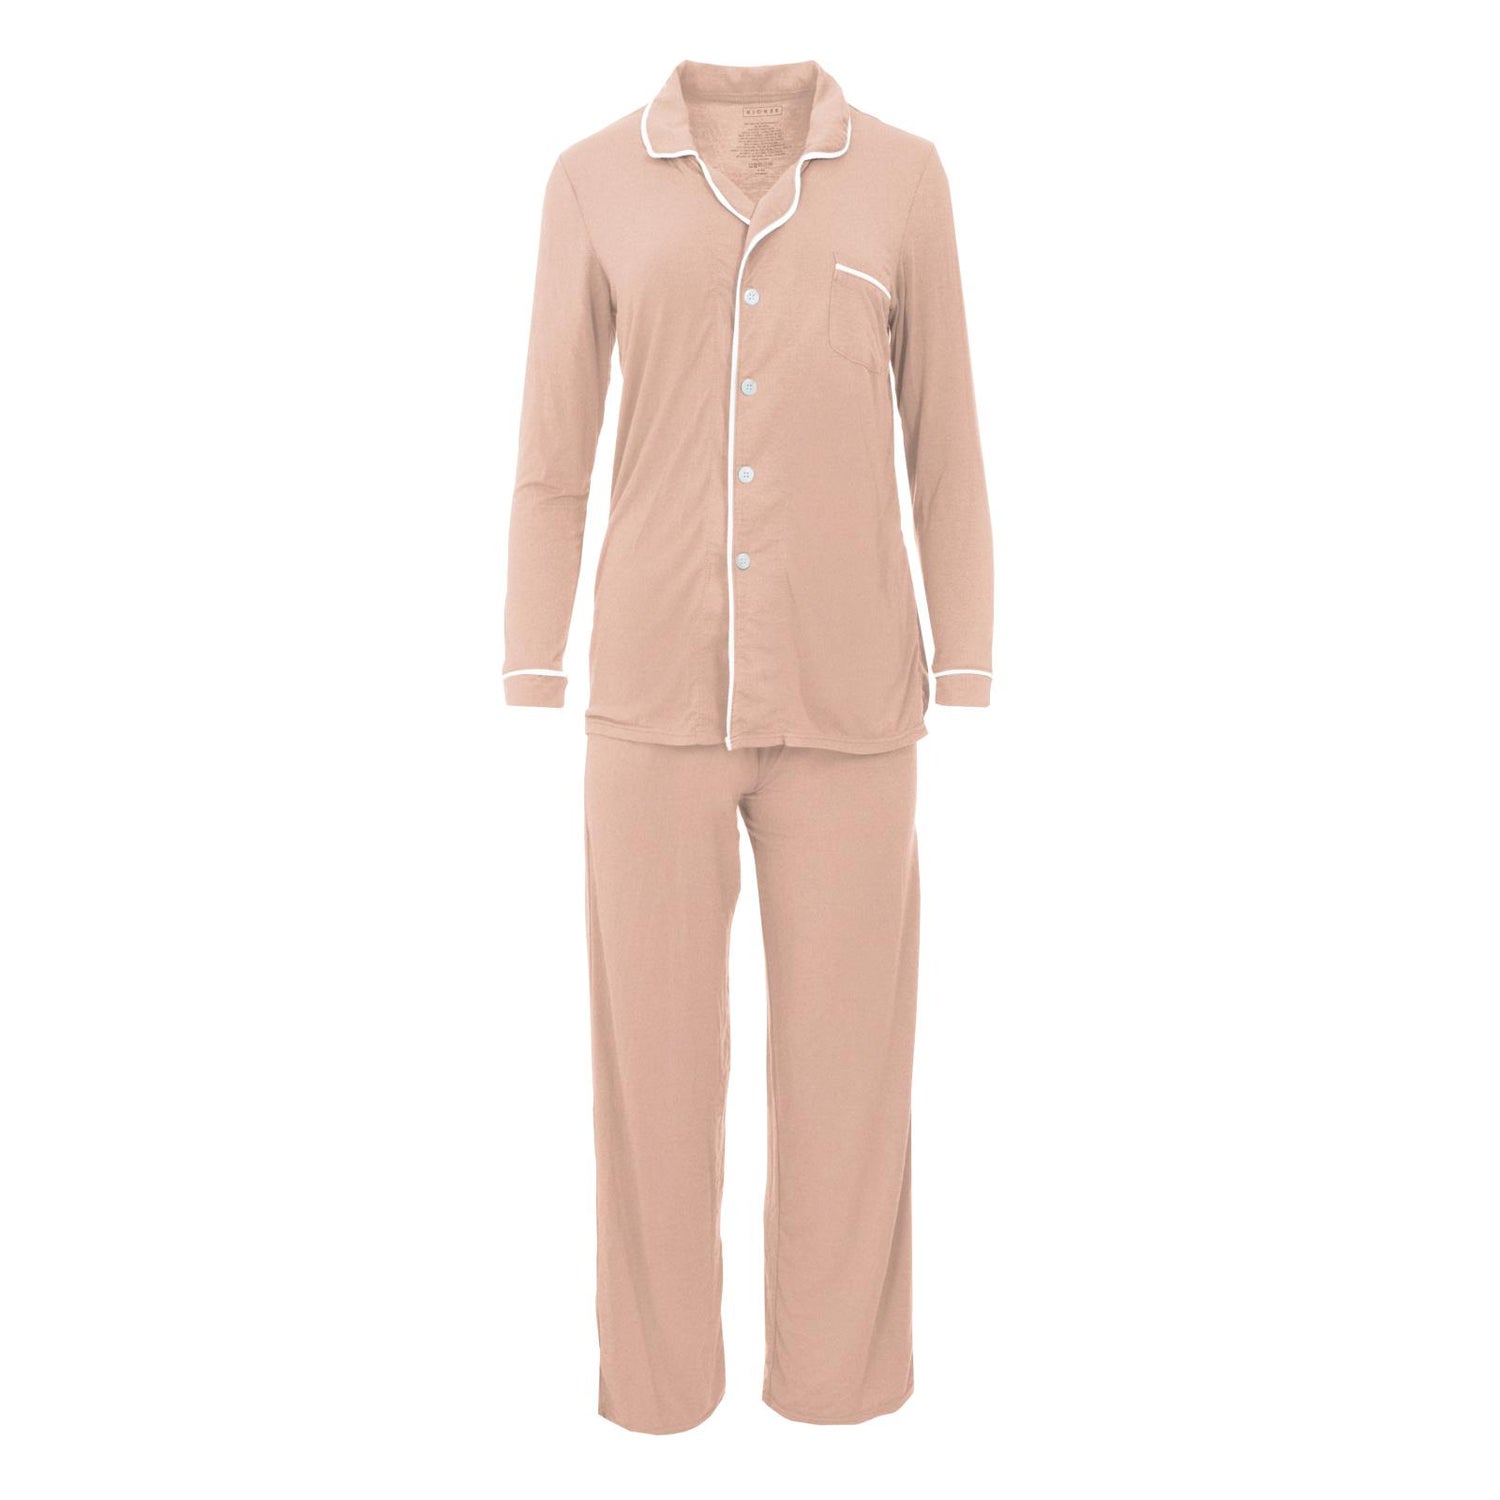 Women's Solid Long Sleeved Collared Pajama Set in Peach Blossom with Natural